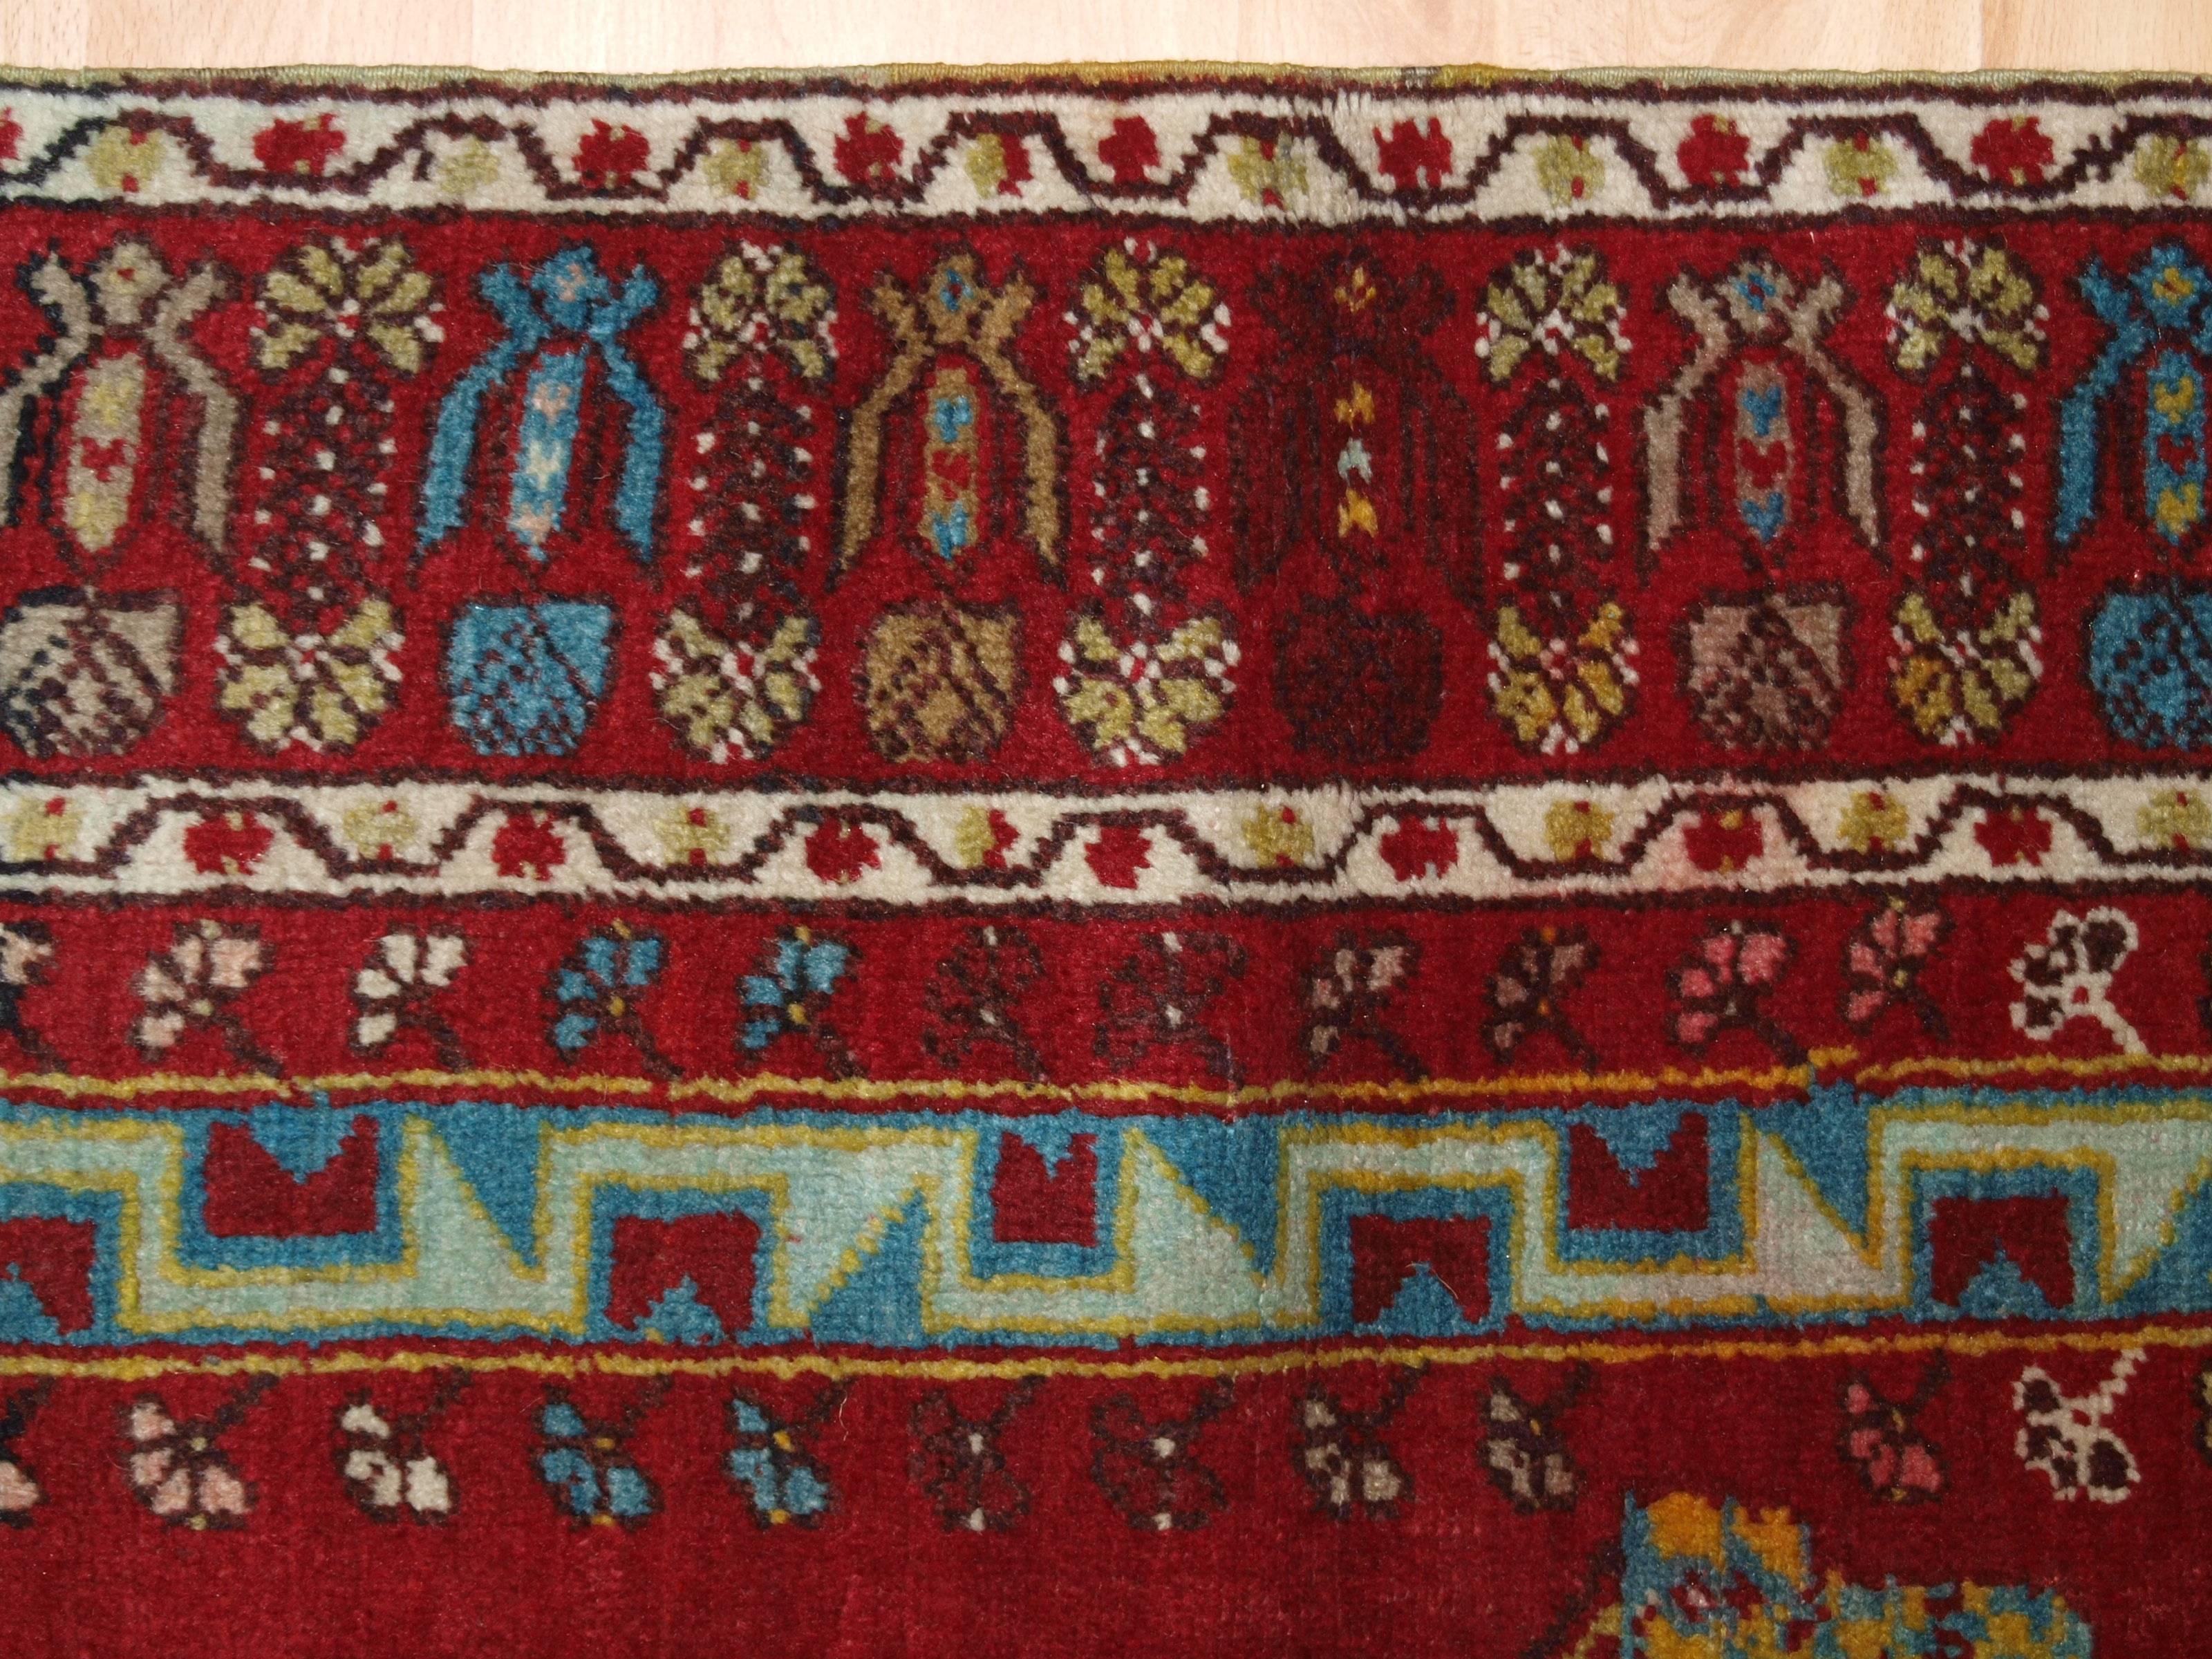 Antique Turkish Kirsehir village prayer rug, circa 1900 (one of a pair) two.
Antique Anatolian Kirsehir village prayer rug.

Size: 5ft 5in x 3ft 8in (166 x 111cm).

circa 1900.

An interesting pictorial prayer rug with trees and villages